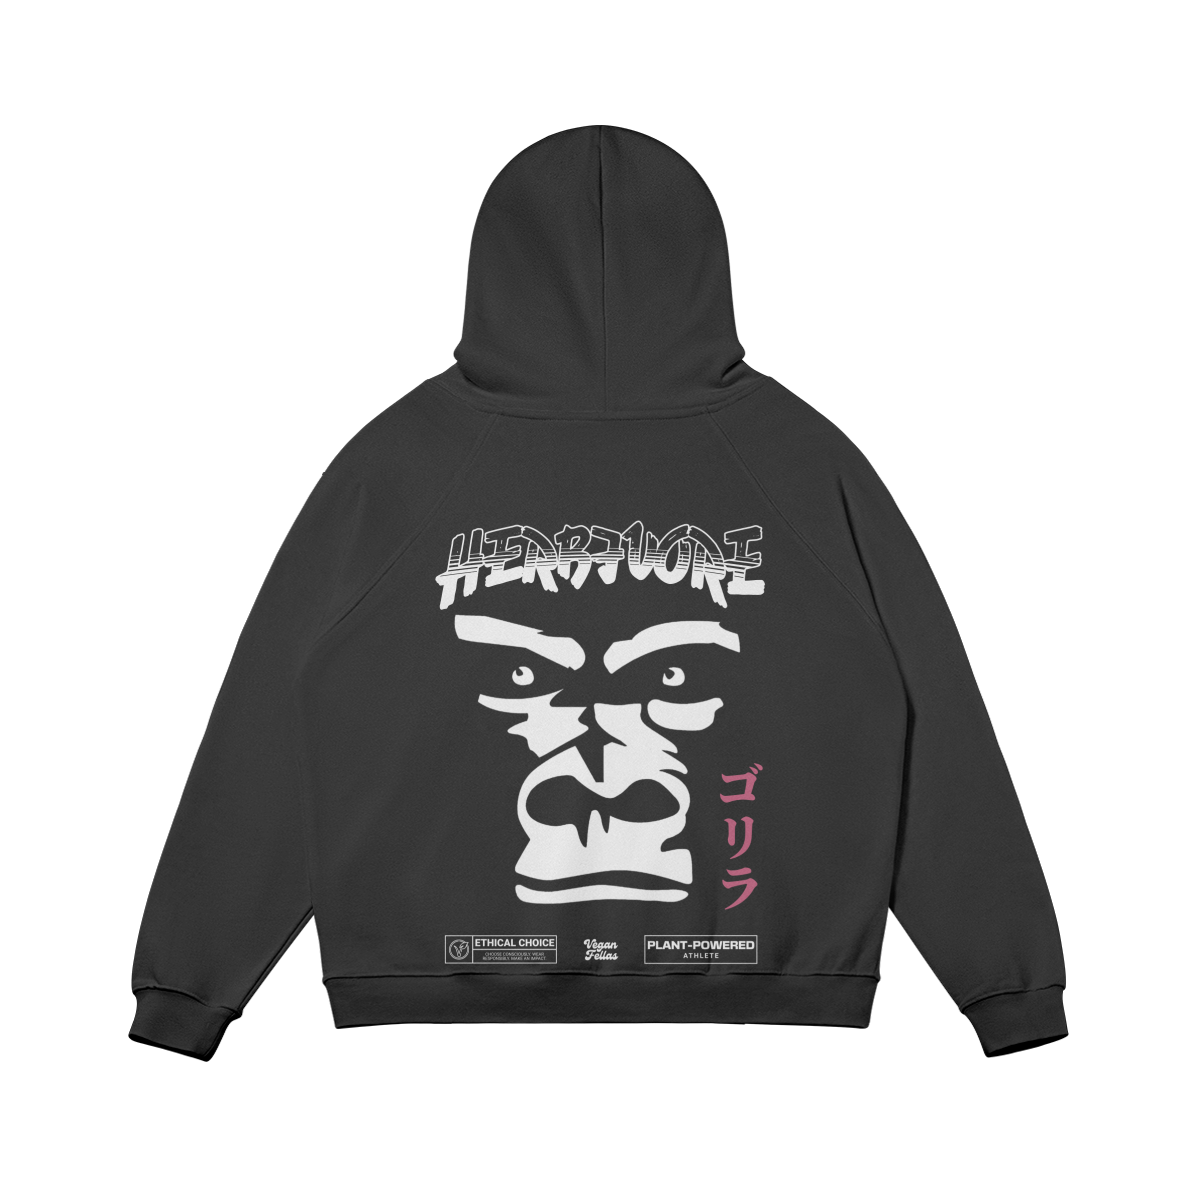 Back of Vegan Outfitter's Black Oversized Hoodie with Gorilla Design - Herbivore, Japanese Script, and Ethical Badges